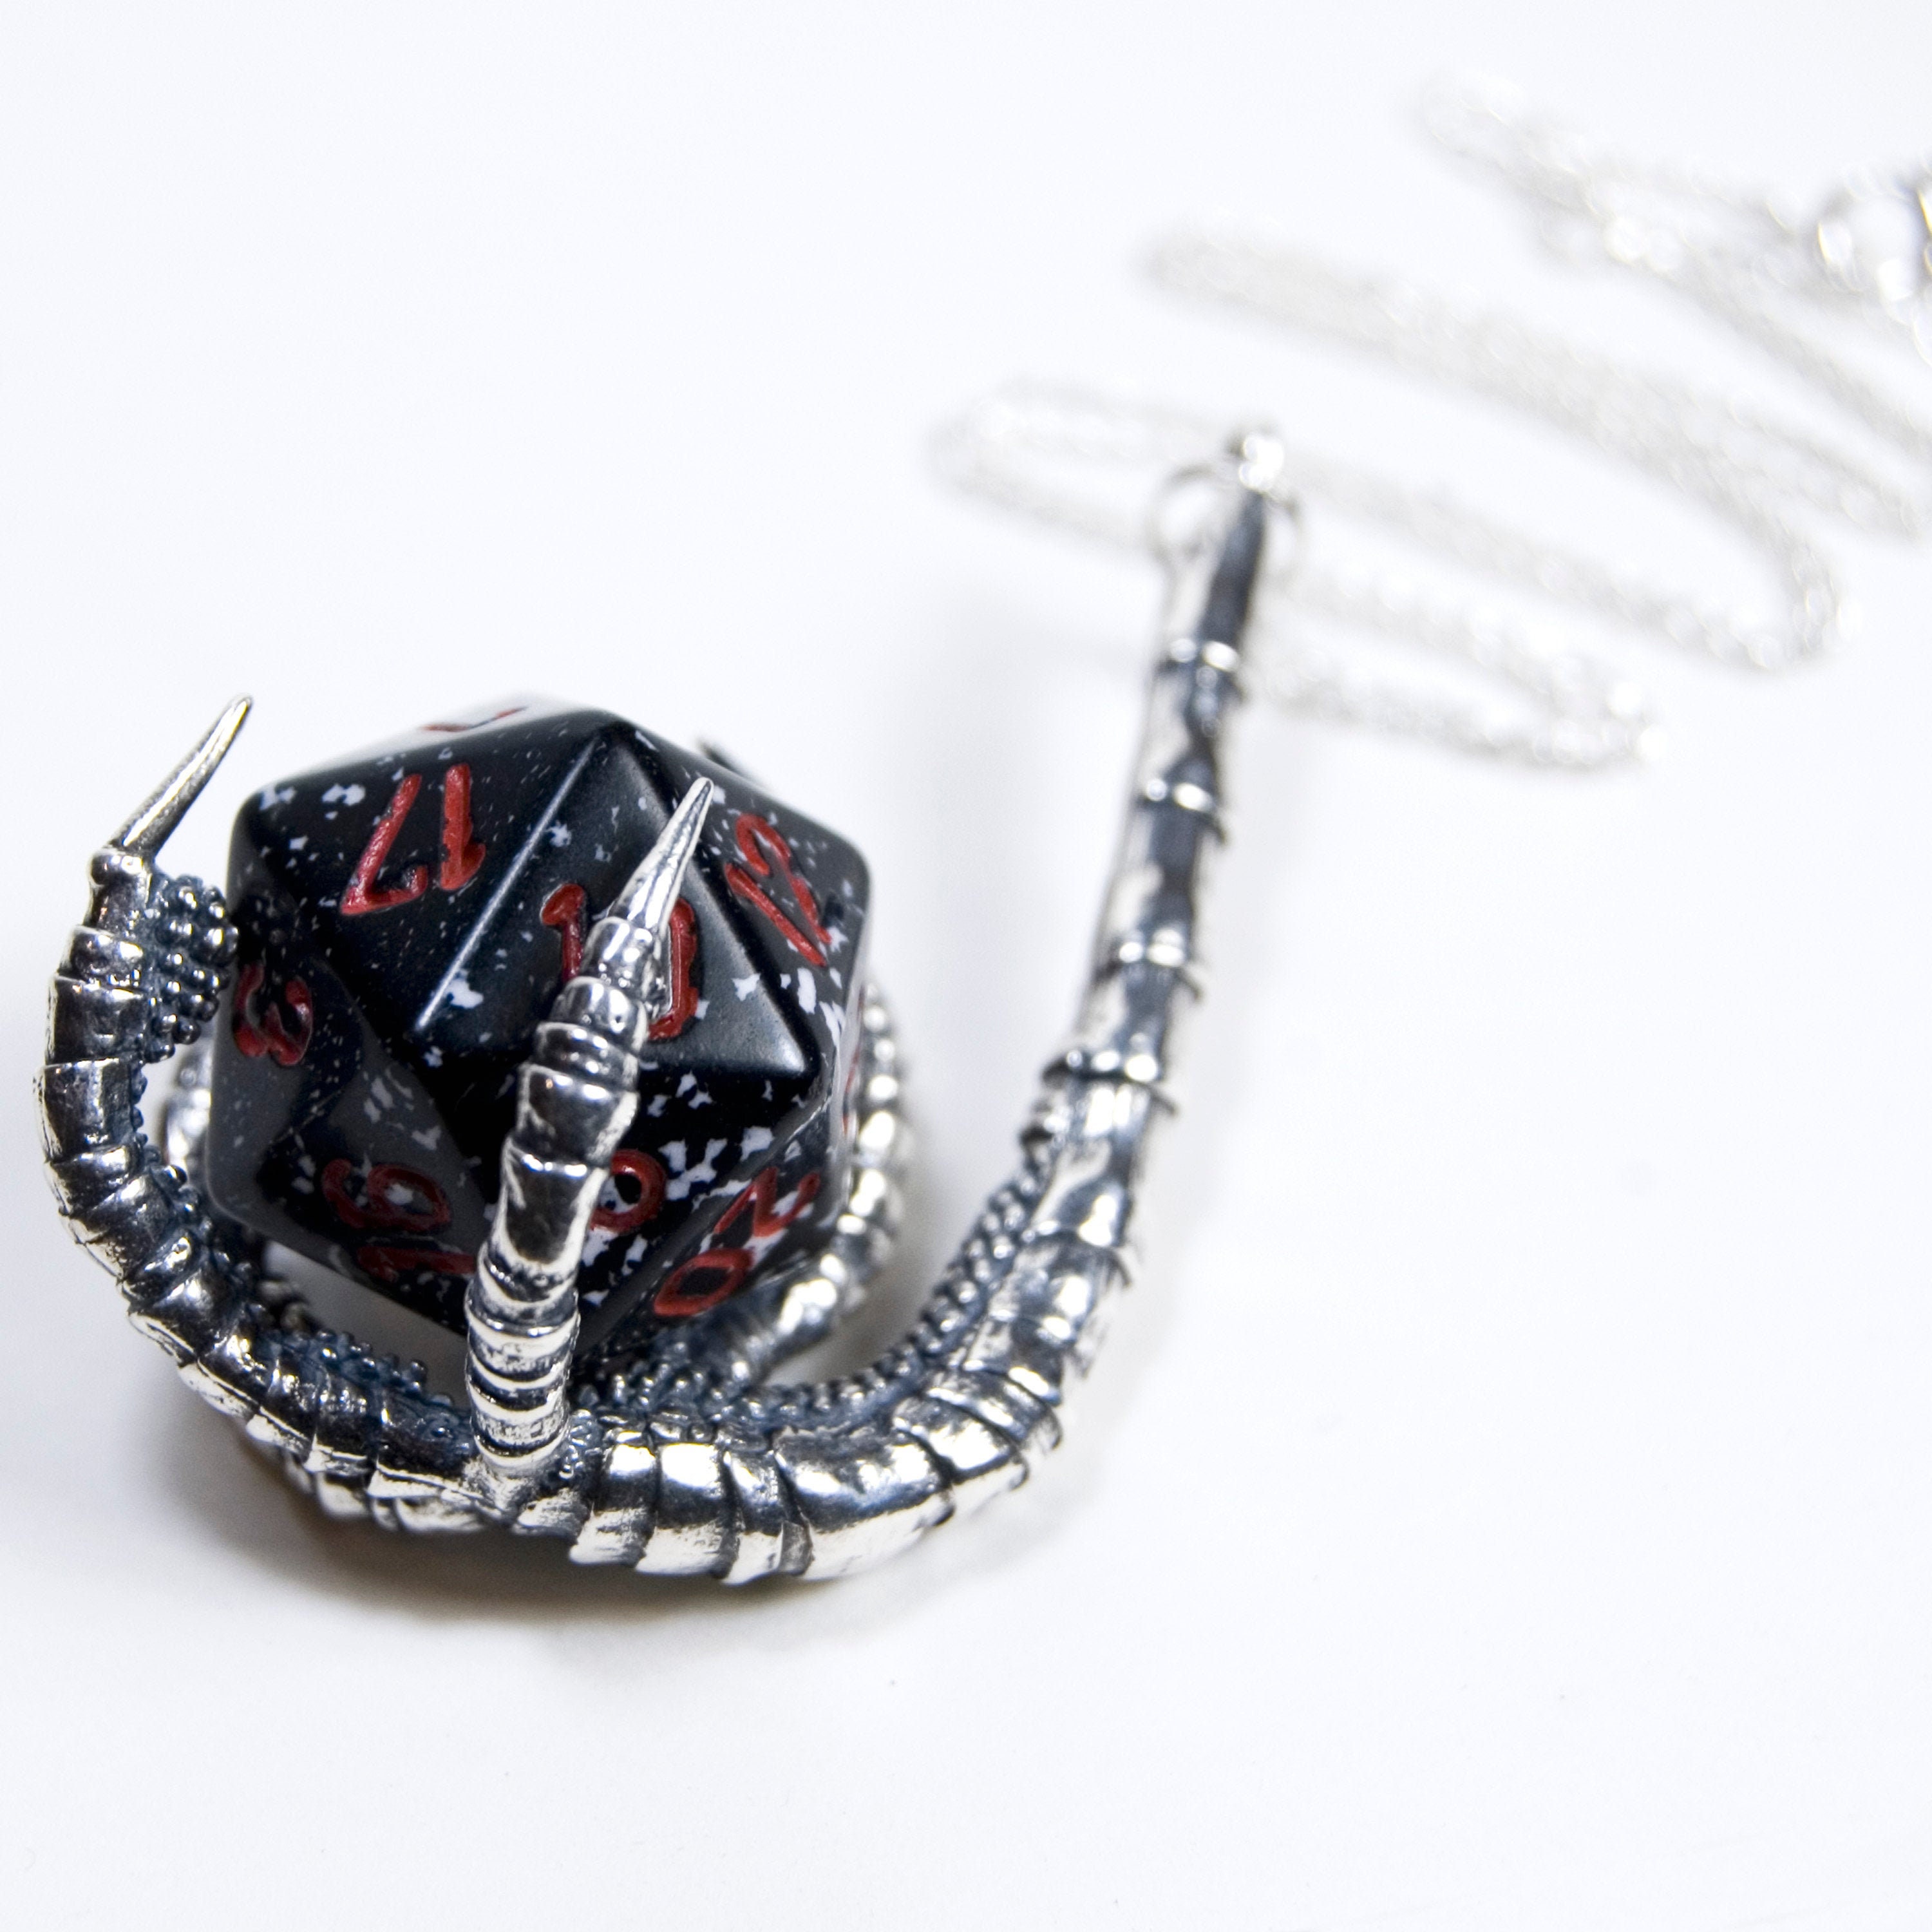 D20 captured necklace with dragon head clasp – DragonClaw ChainMaille